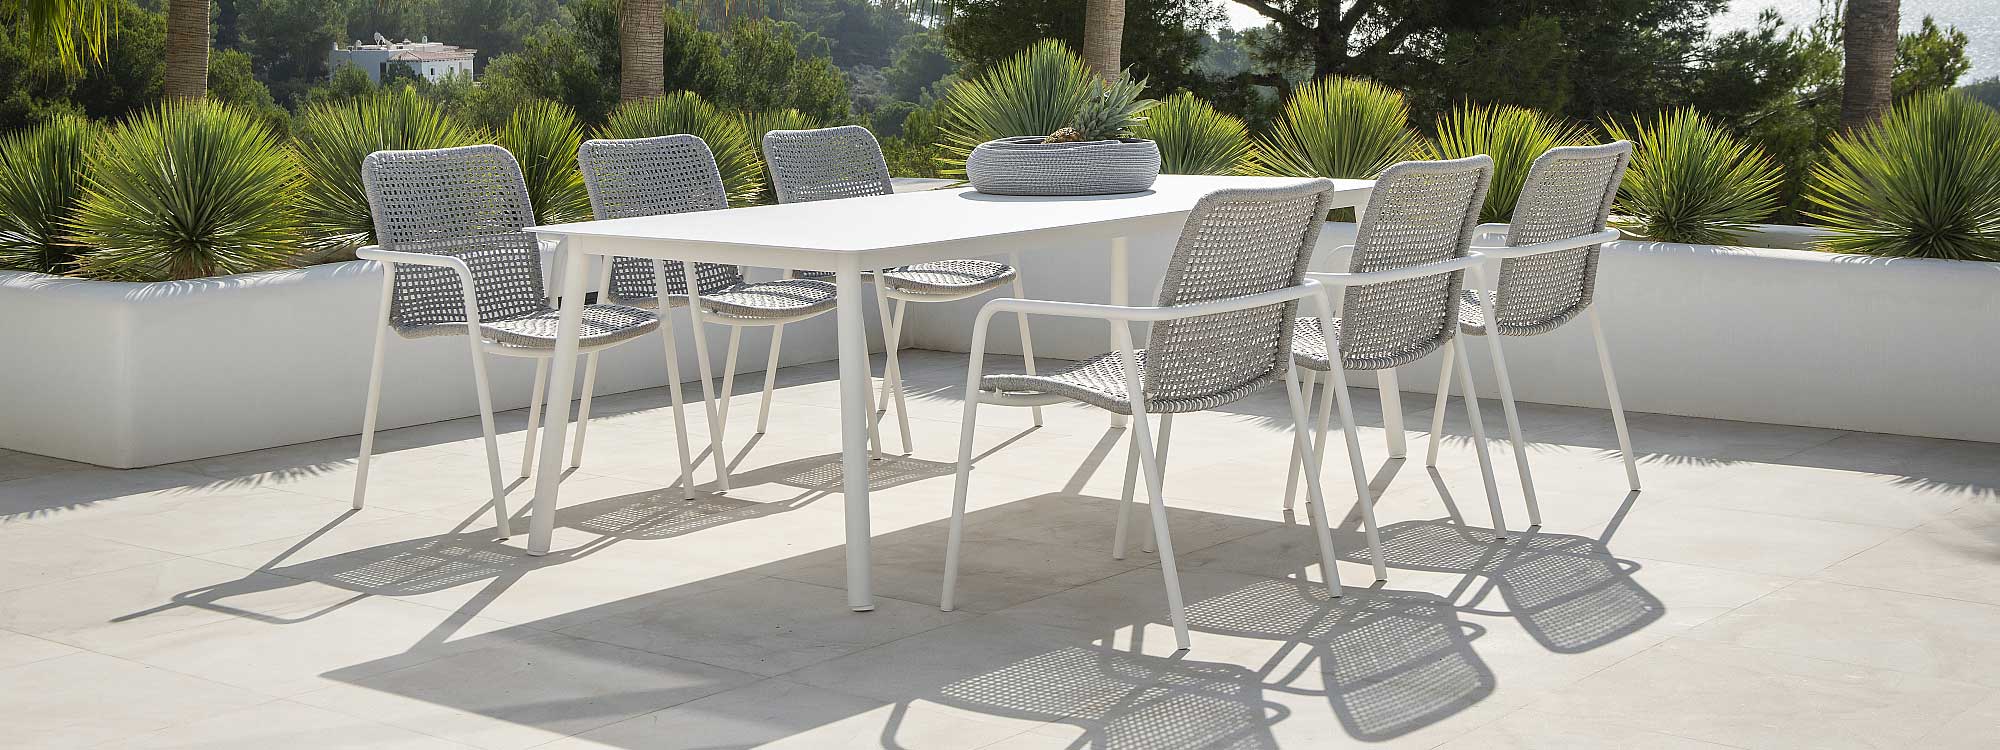 Image of Durham modern garden furniture with white tubular aluminium frames and white-grey Polyolefin rope seats and backs by Jati & Kebon, shown on sunny whitewashed terrace, with exotic plants and the sea in the background